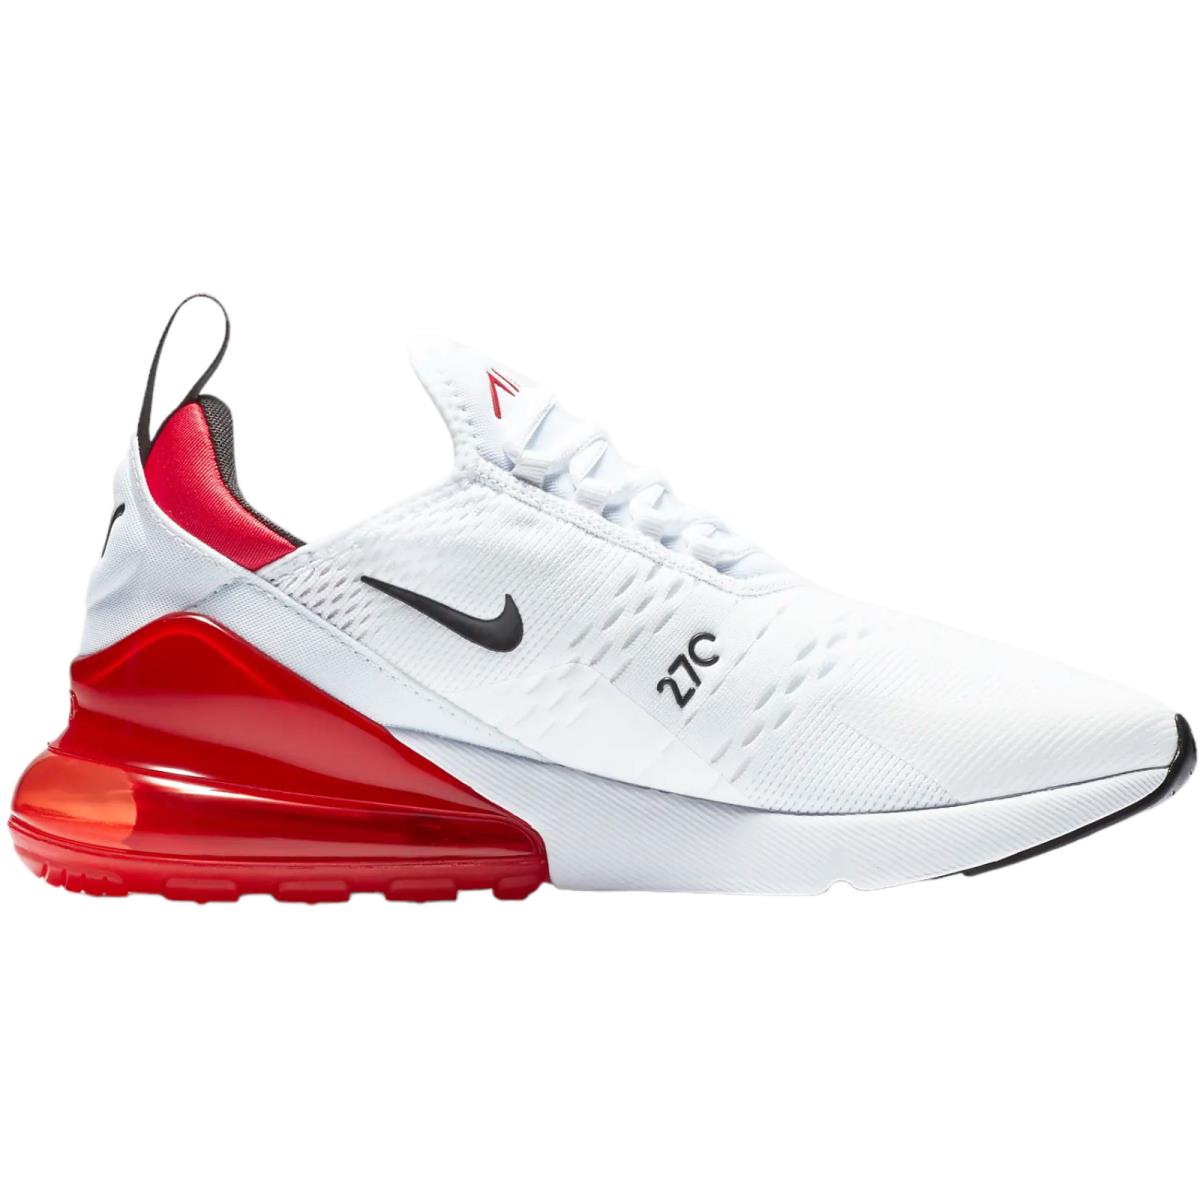 Nike Air Max 270 Men`s Casual Shoes All Colors US Sizes 7-14 White/University Red/Black